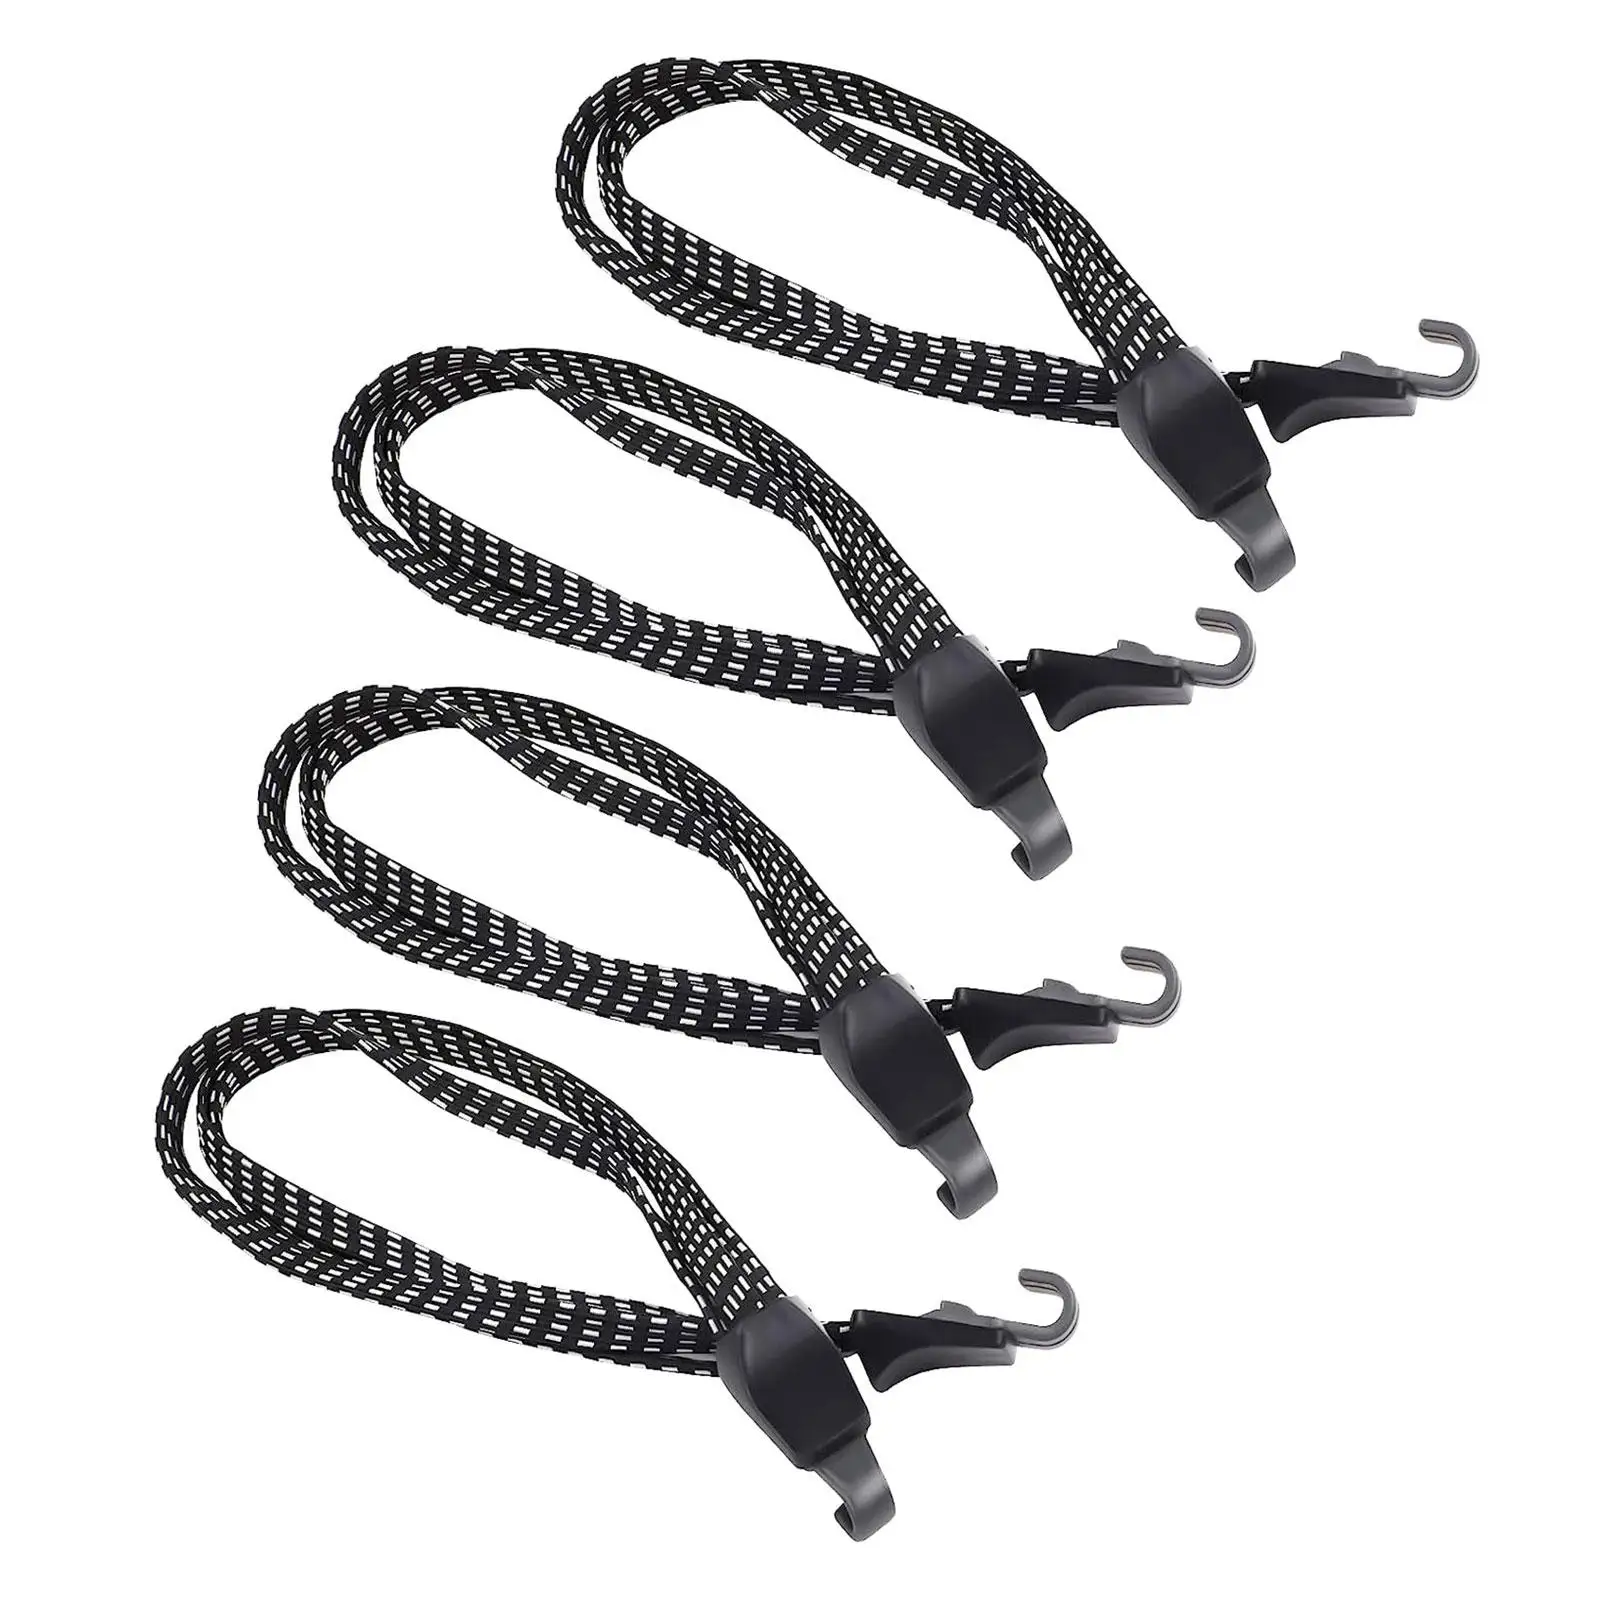 4Pcs Bike Luggage Rope 3 in 1 Strap Stretch Belt Motorcycle Luggage Rack Tie Down Straps for Bicycle Camping Cargo Cart Tie Down